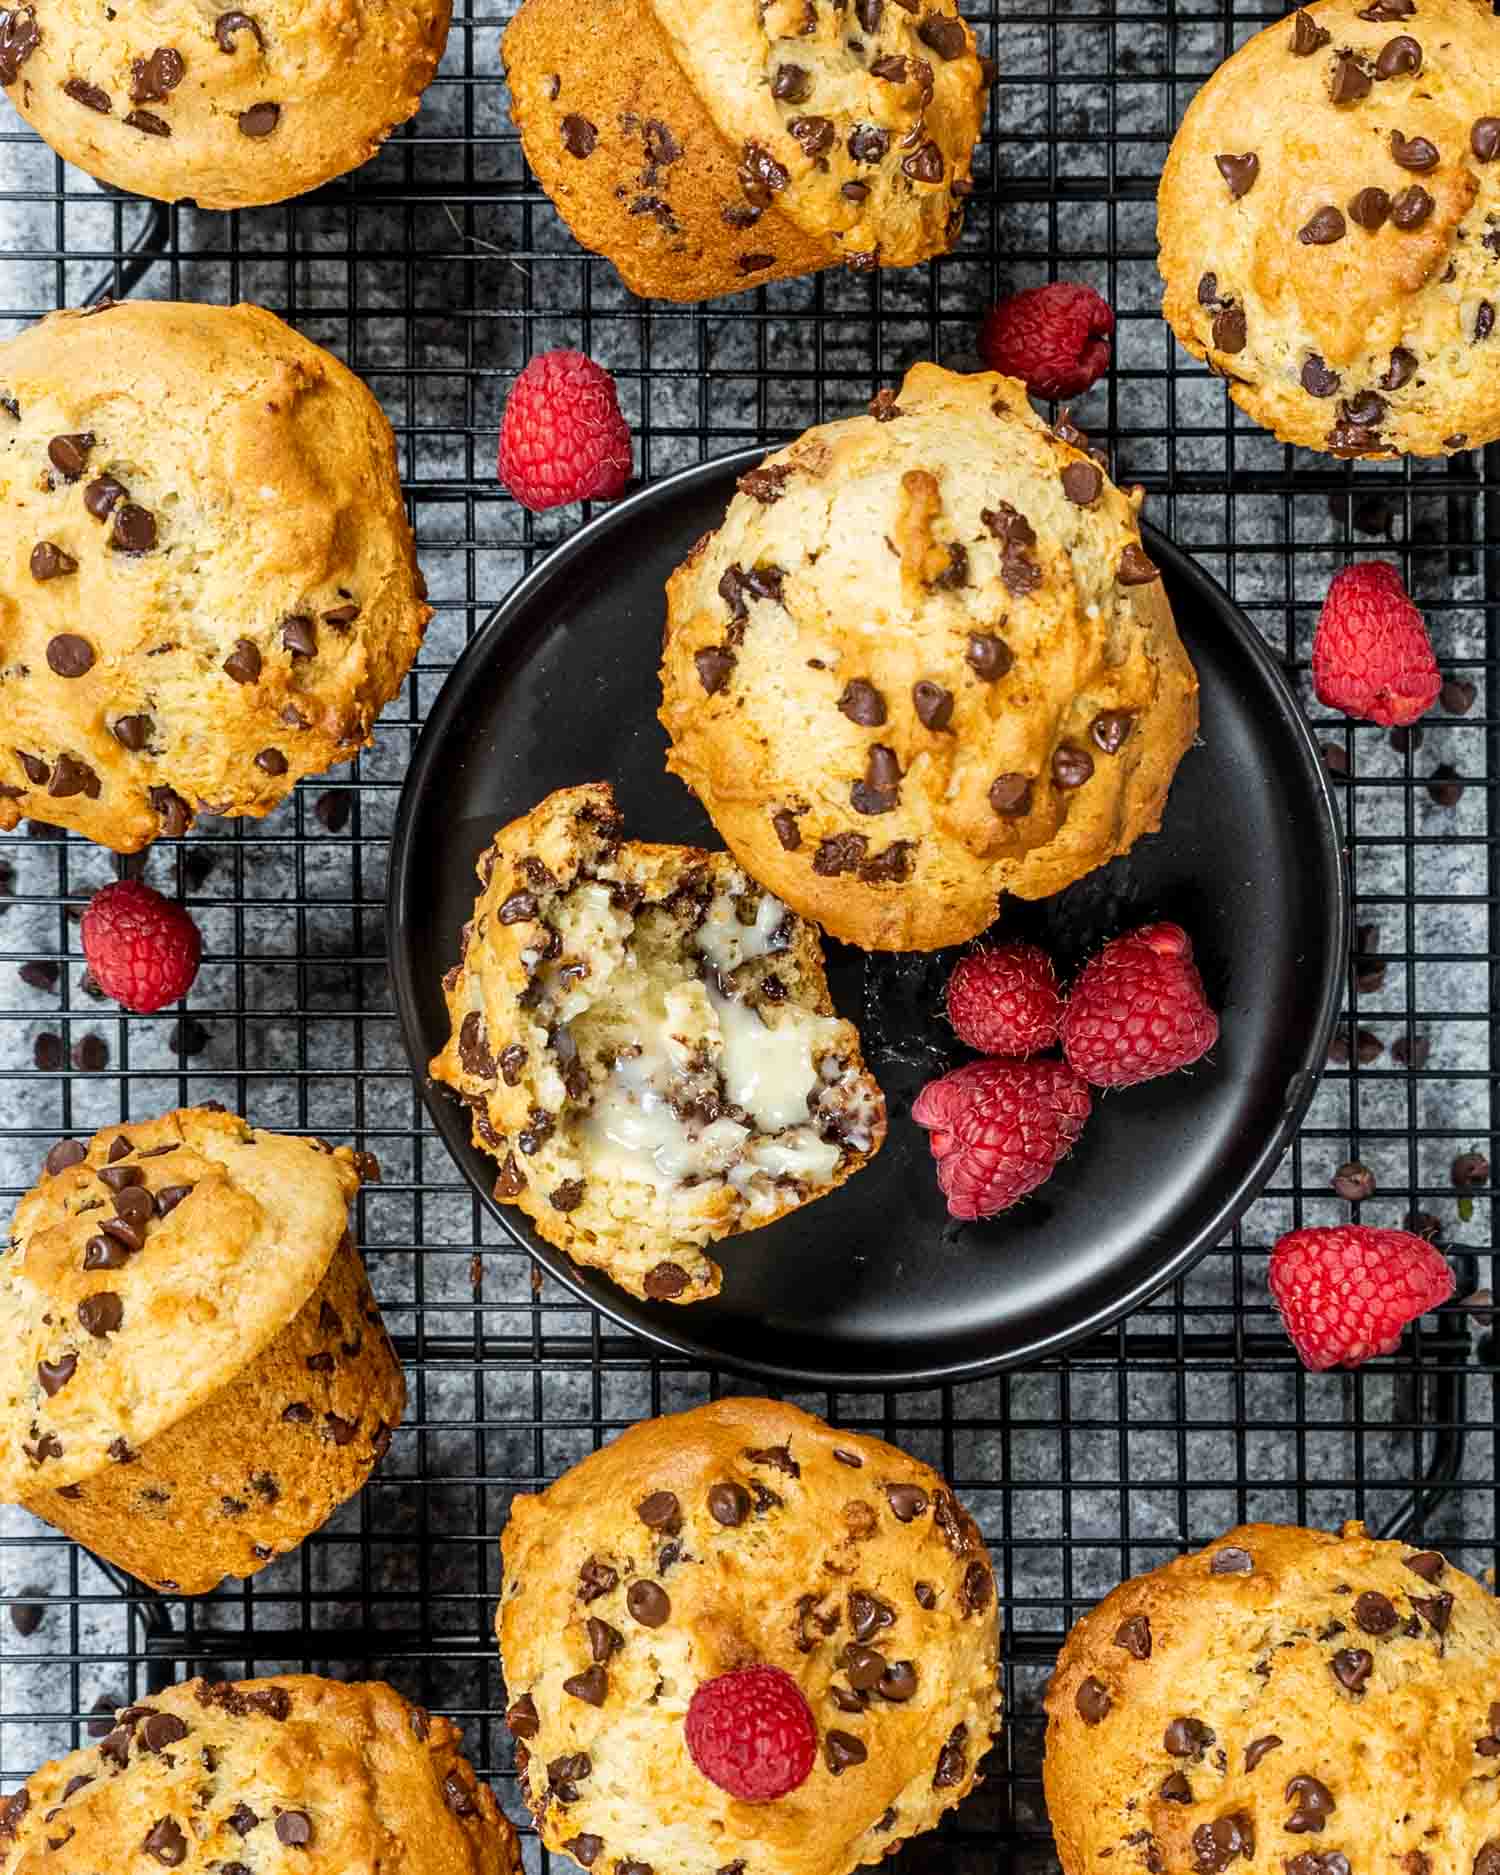 2 muffins, one with butter on a black plate surrounded by some other muffins and raspberries.